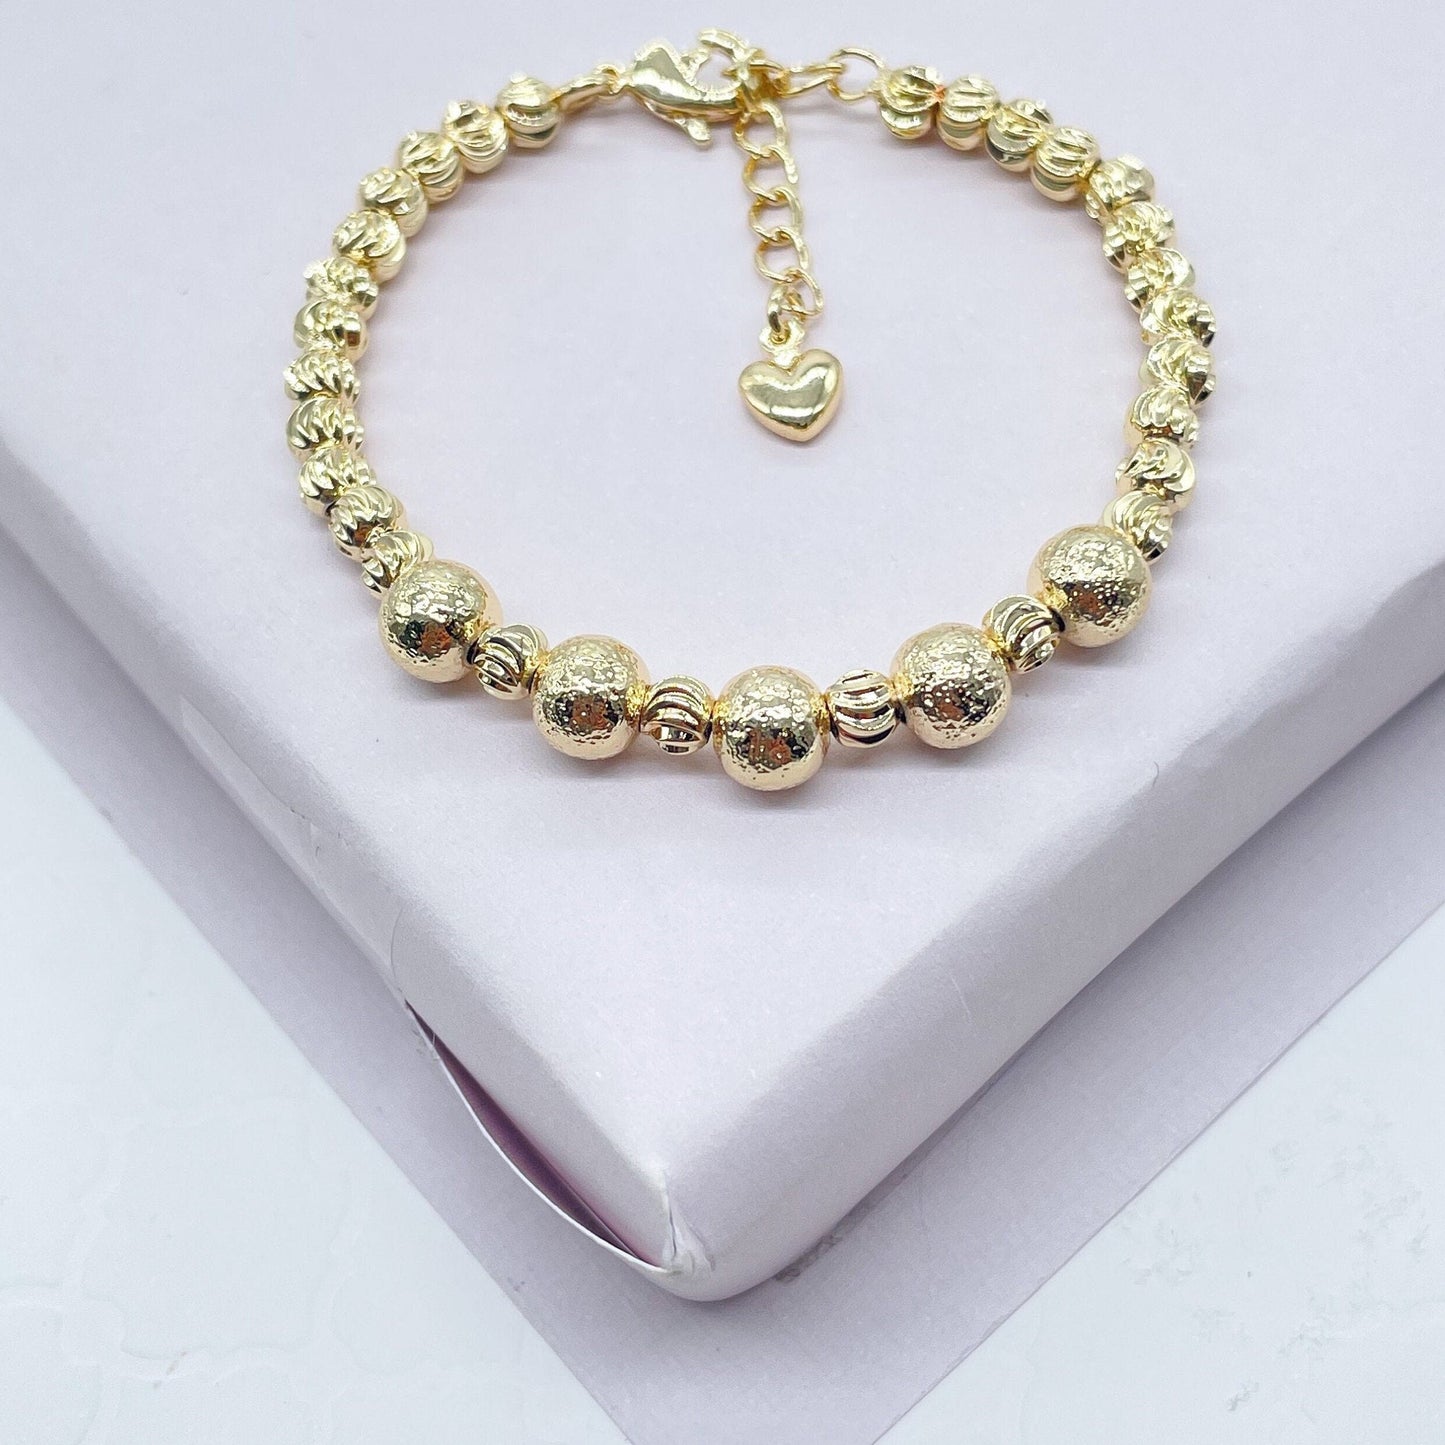 18k Gold Layered Crackle Beaded Kids Bracelet Featuring Fancy Corrugated Small